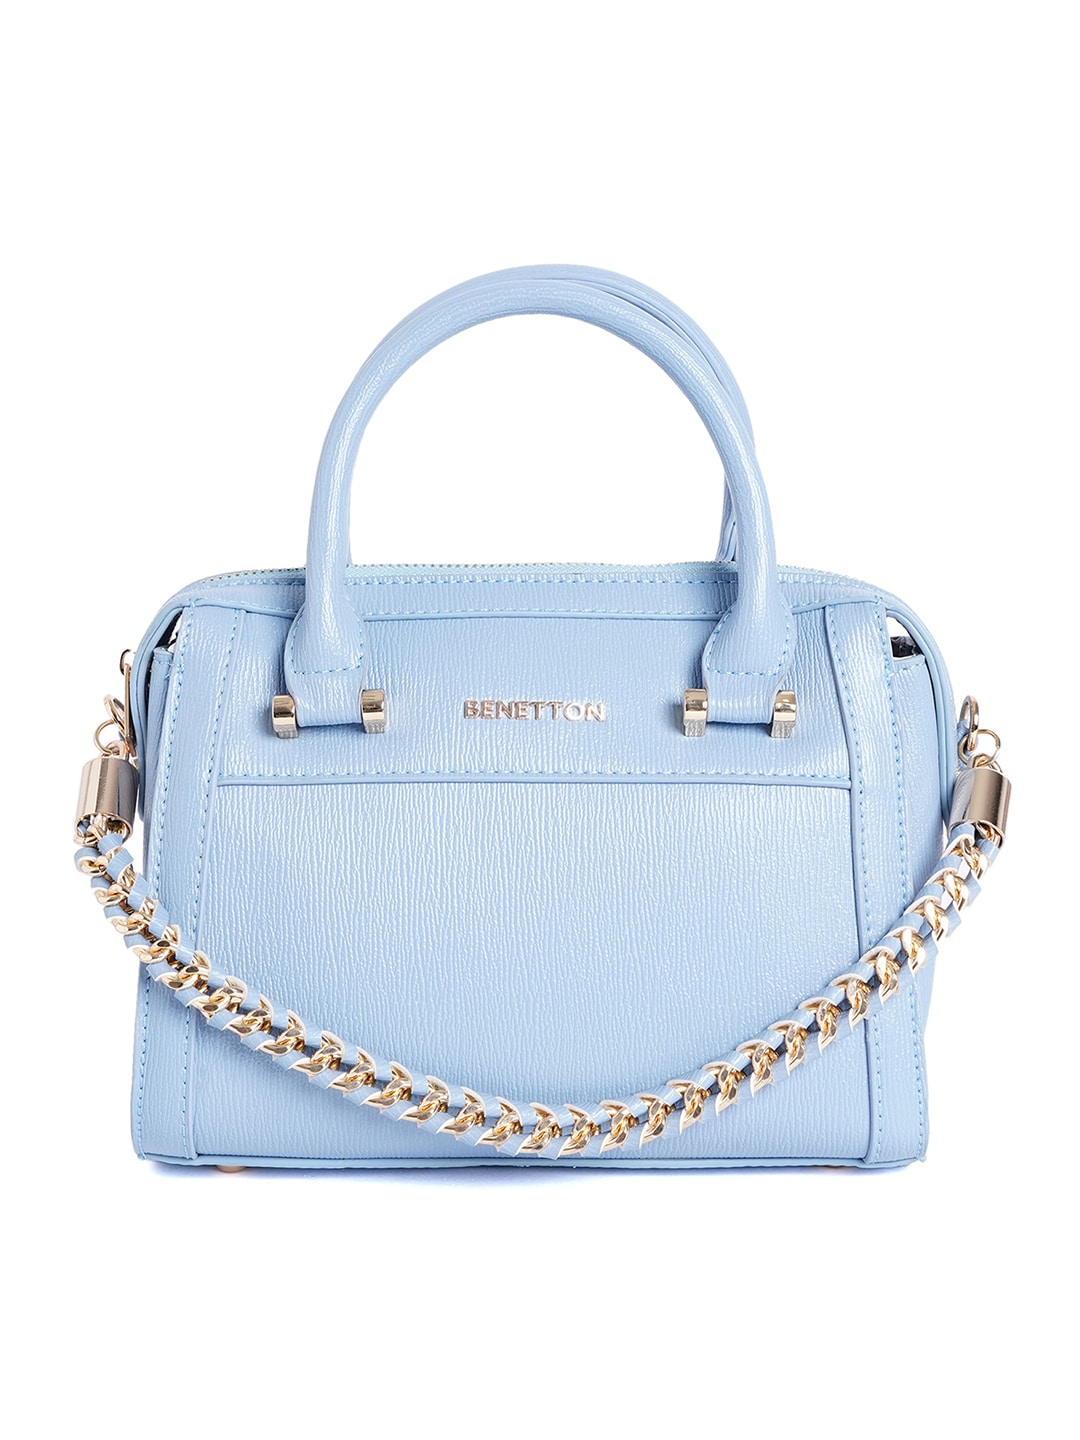 United Colors of Benetton Blue Structured Handheld Bag Price in India